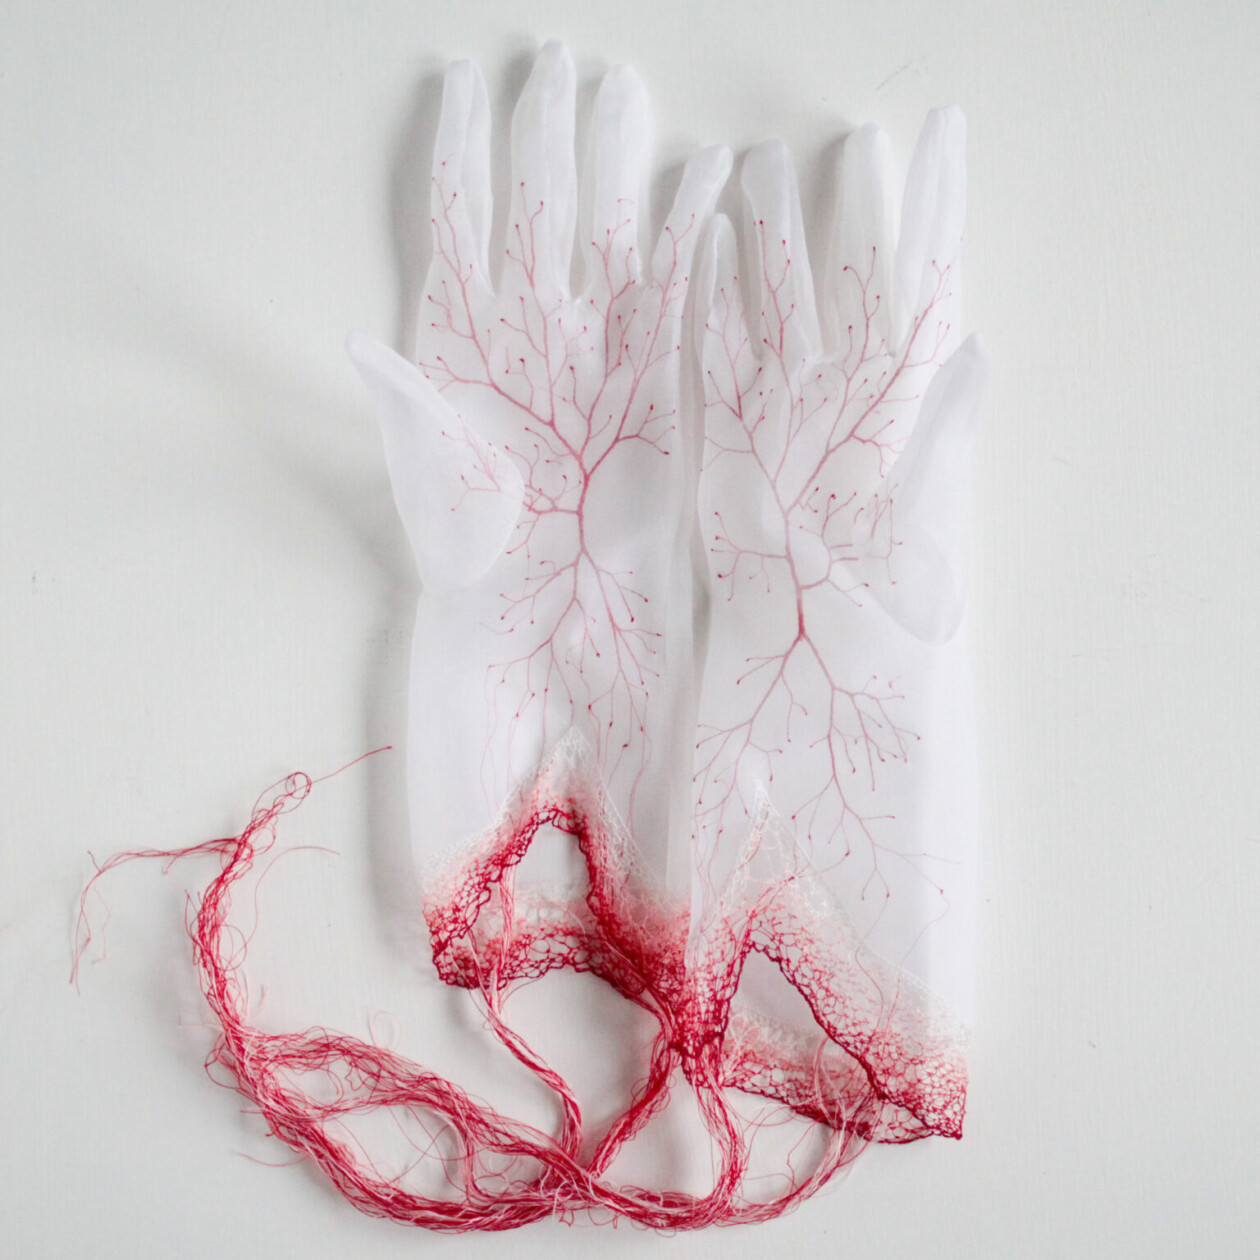 Red Threads, Intriguing Mixed Media Sculptures By Rima Day (10)